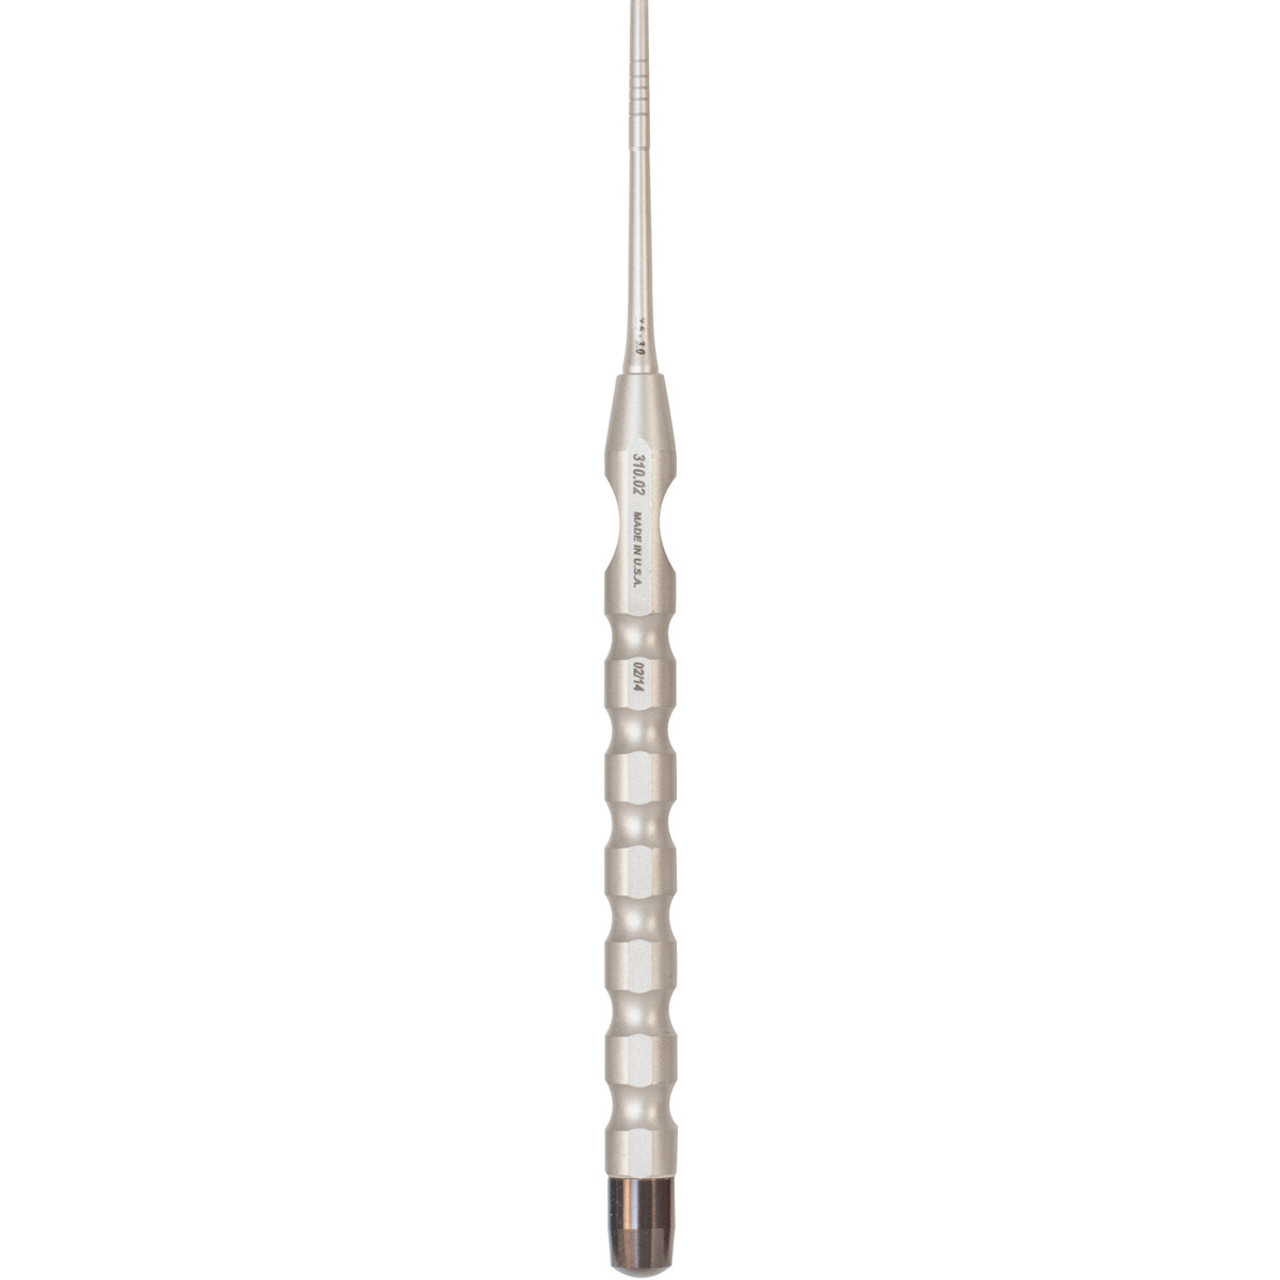 A.Titan - Osteotome, straight, concave, 2.5mm - 10 - 13 - 15 - 16mm